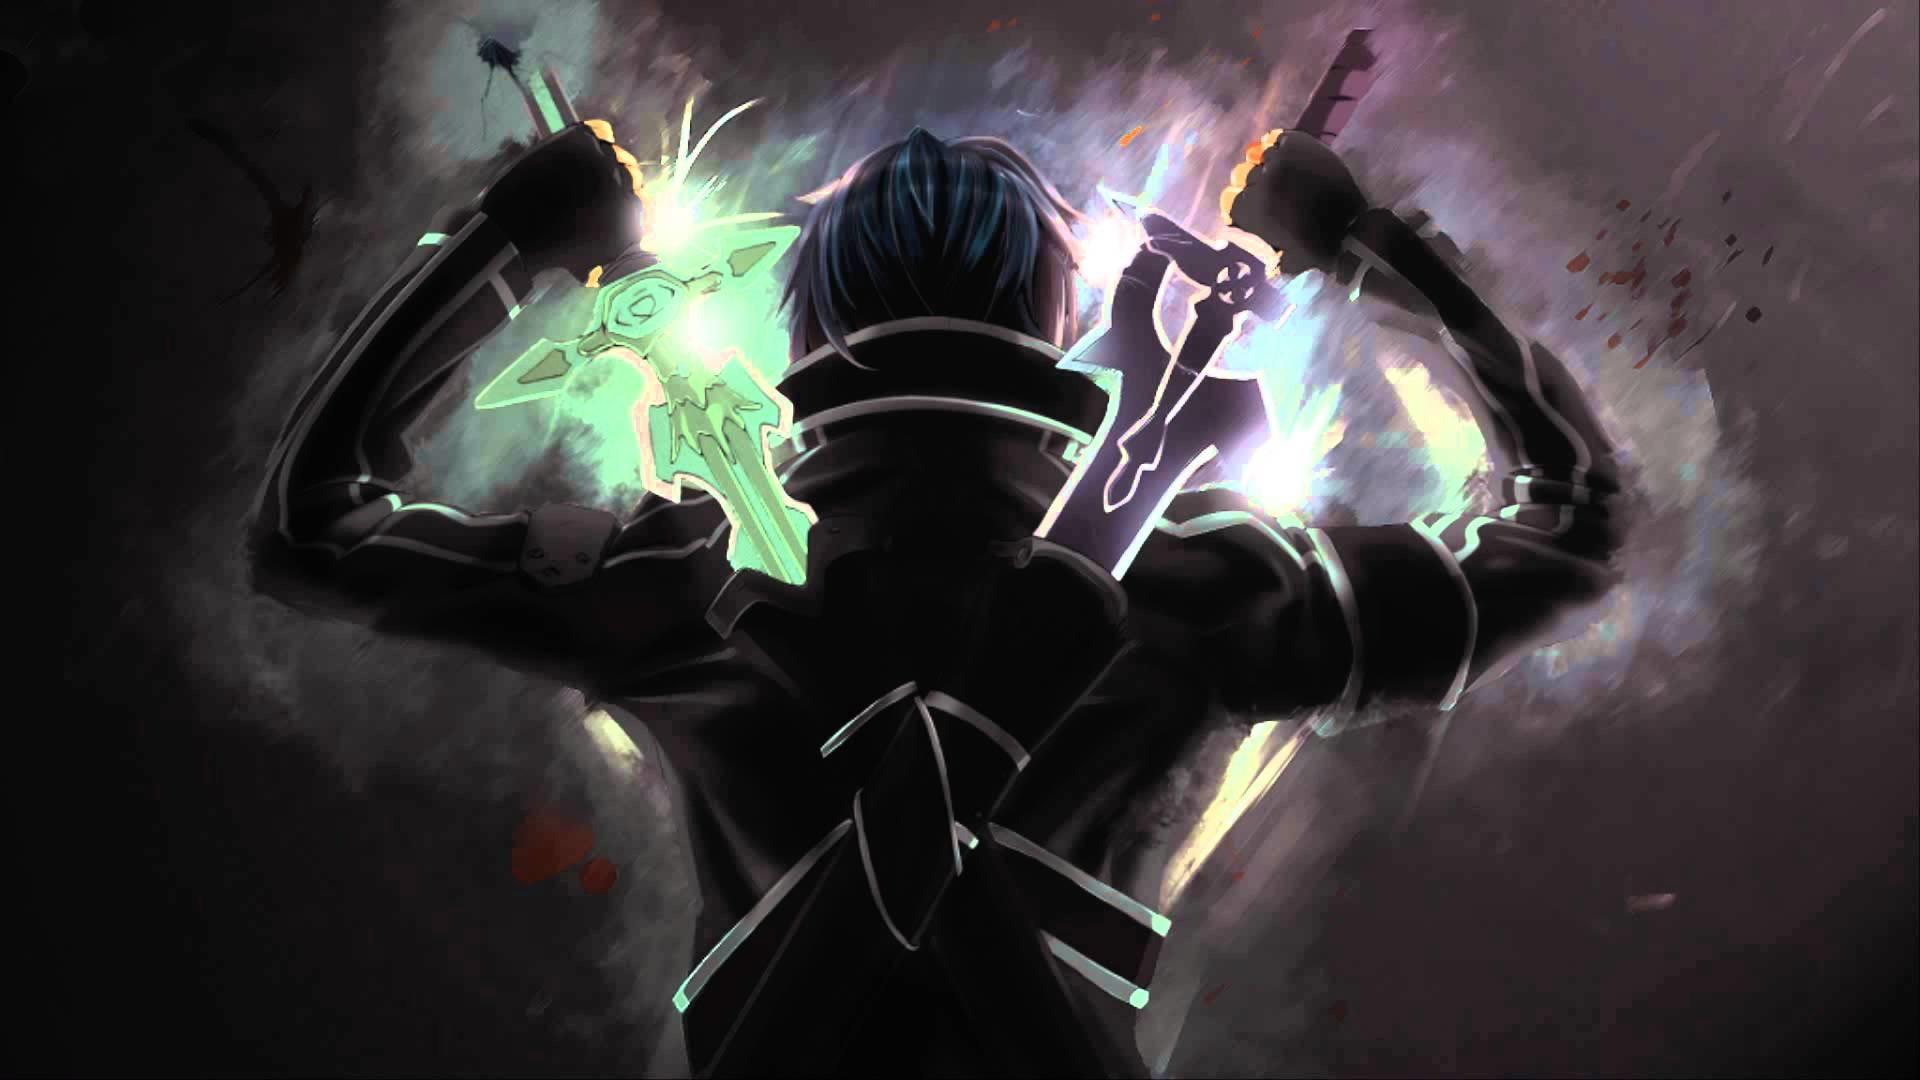 Cool Anime Fight Wallpaper Free Cool Anime Fight Background